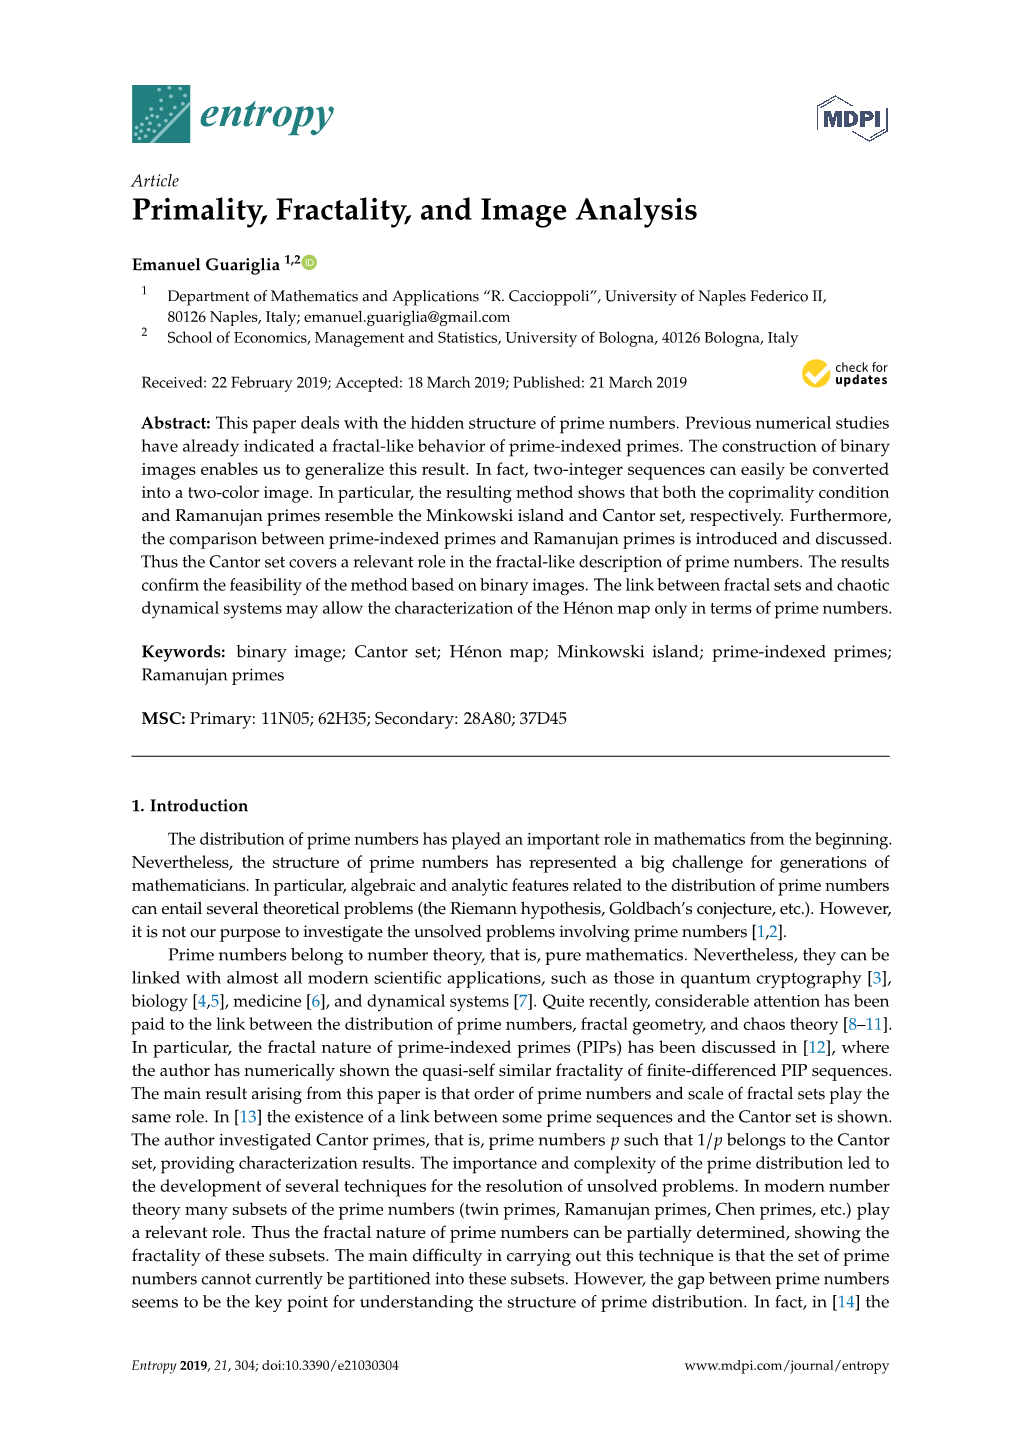 Primality, Fractality, and Image Analysis